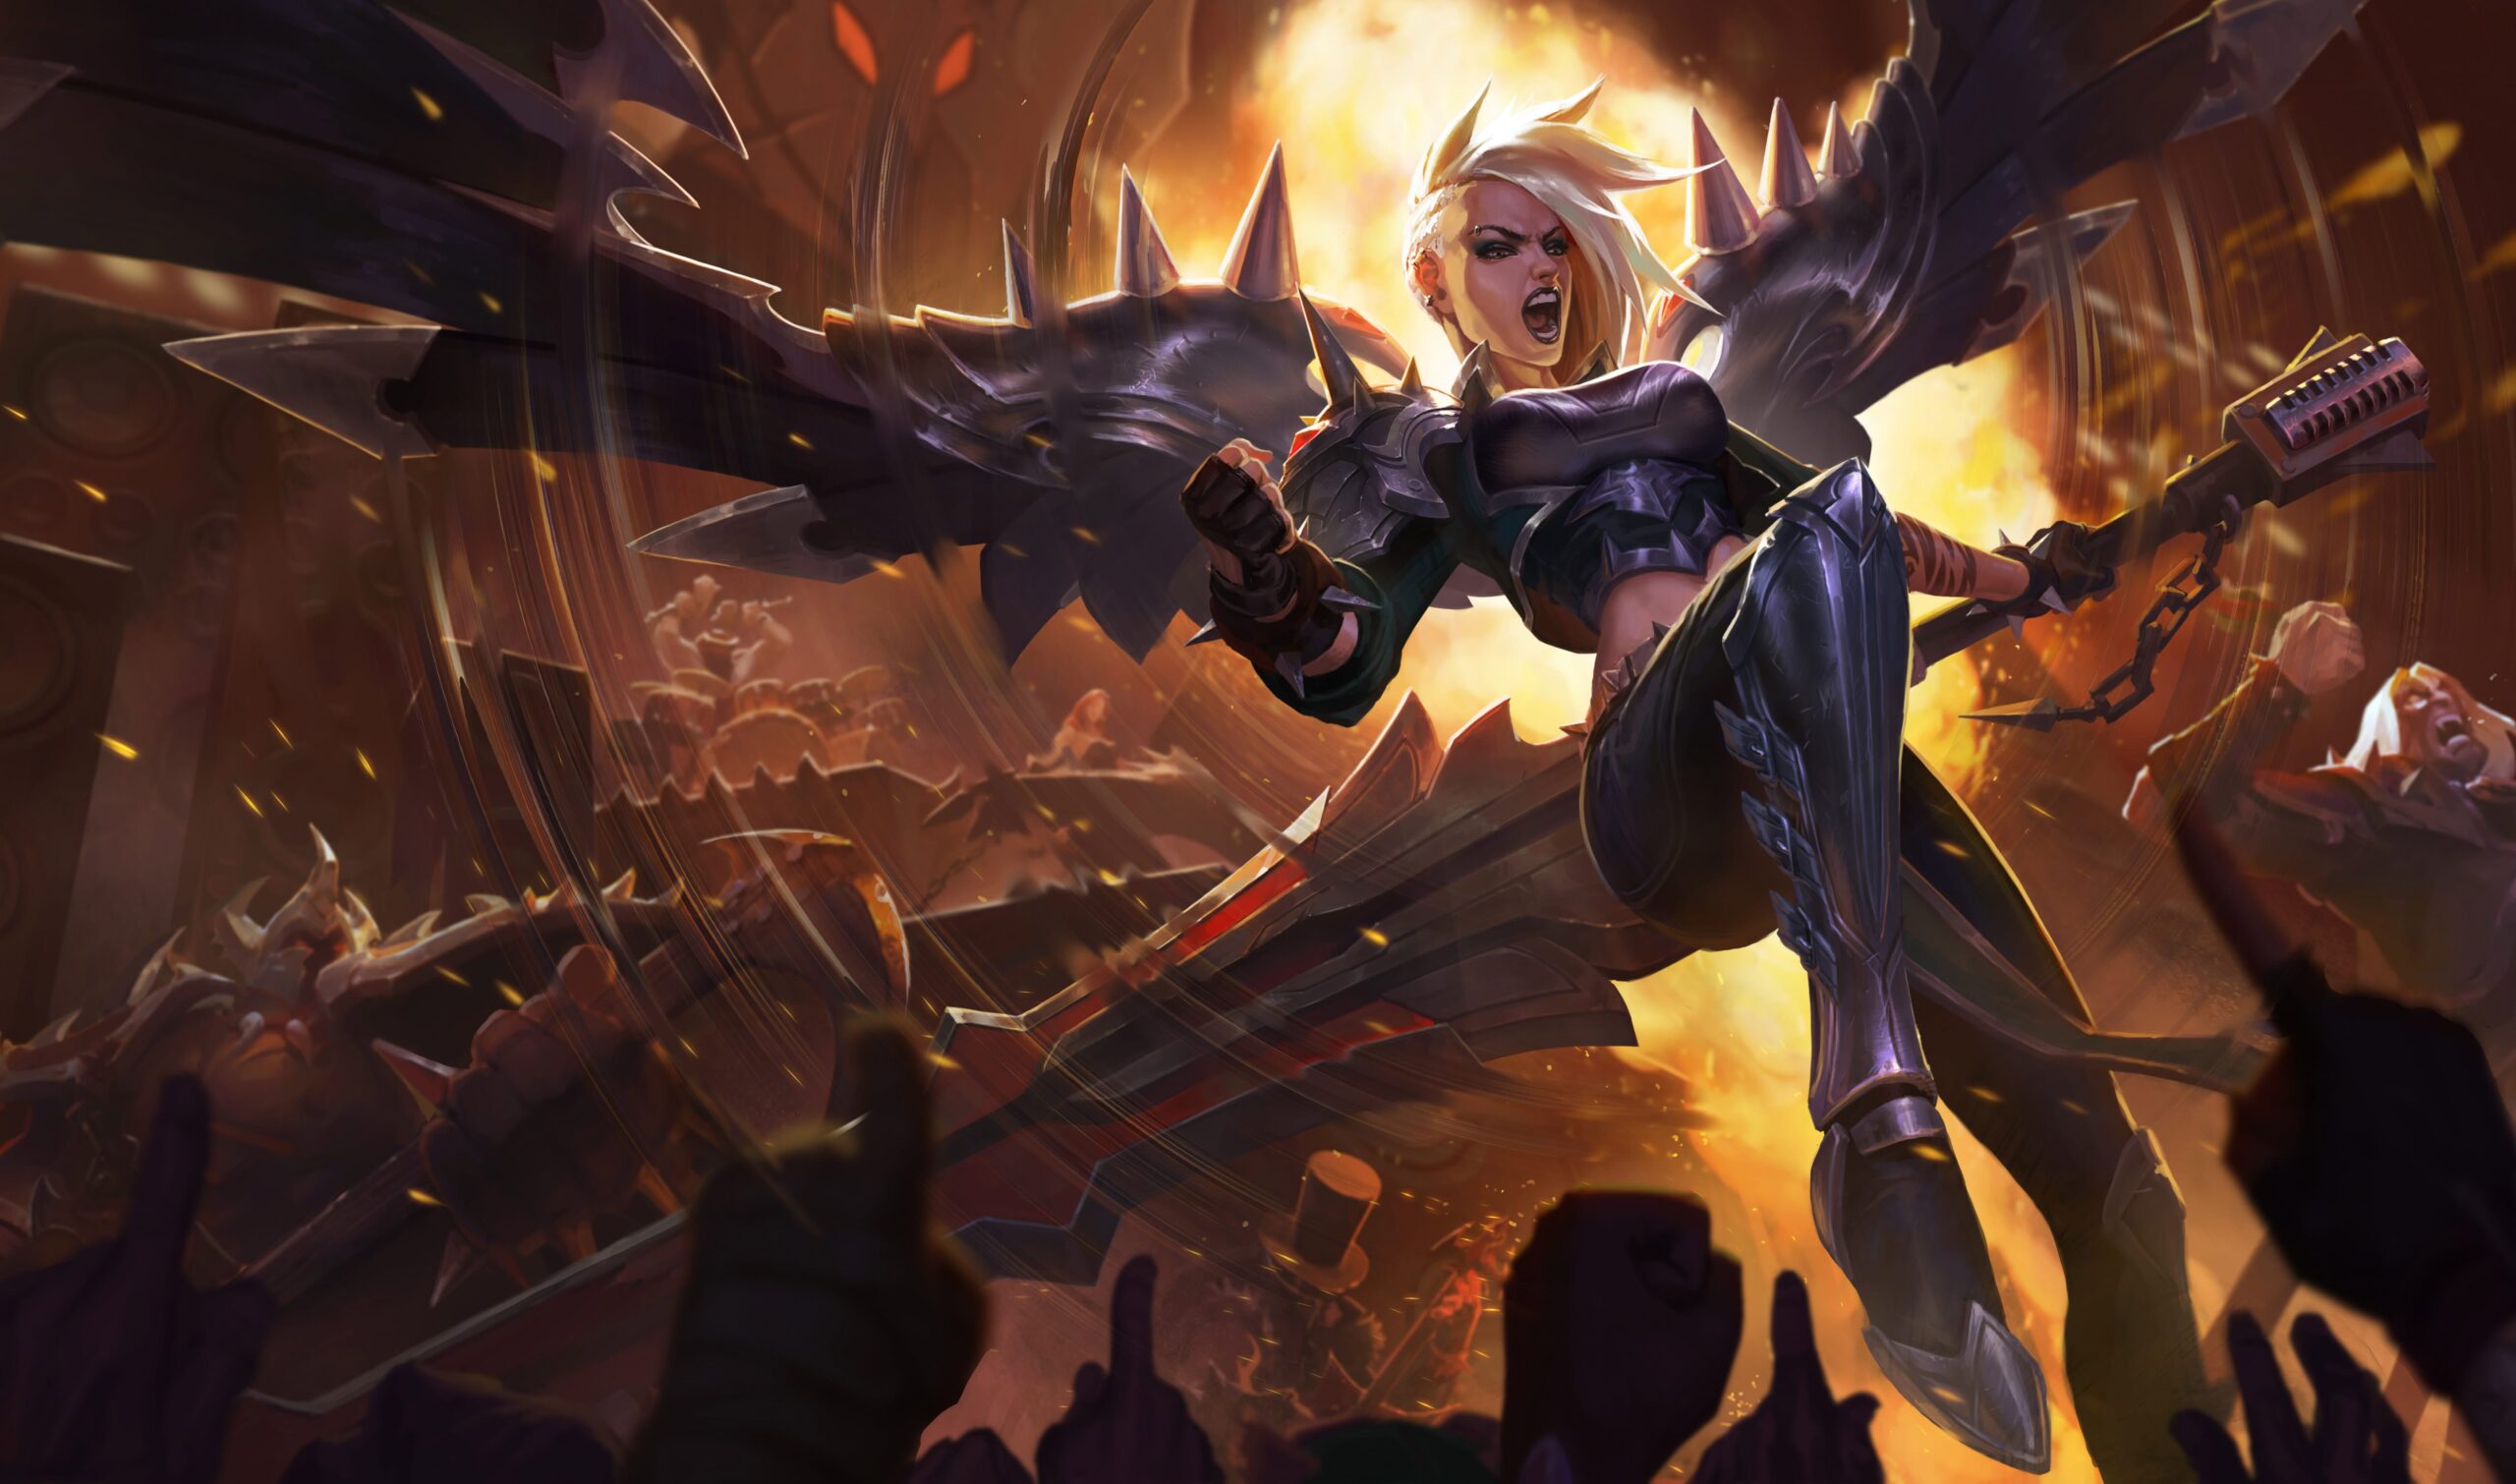 Kayle Pentakill of League of legends in battle fighting with her metal wings